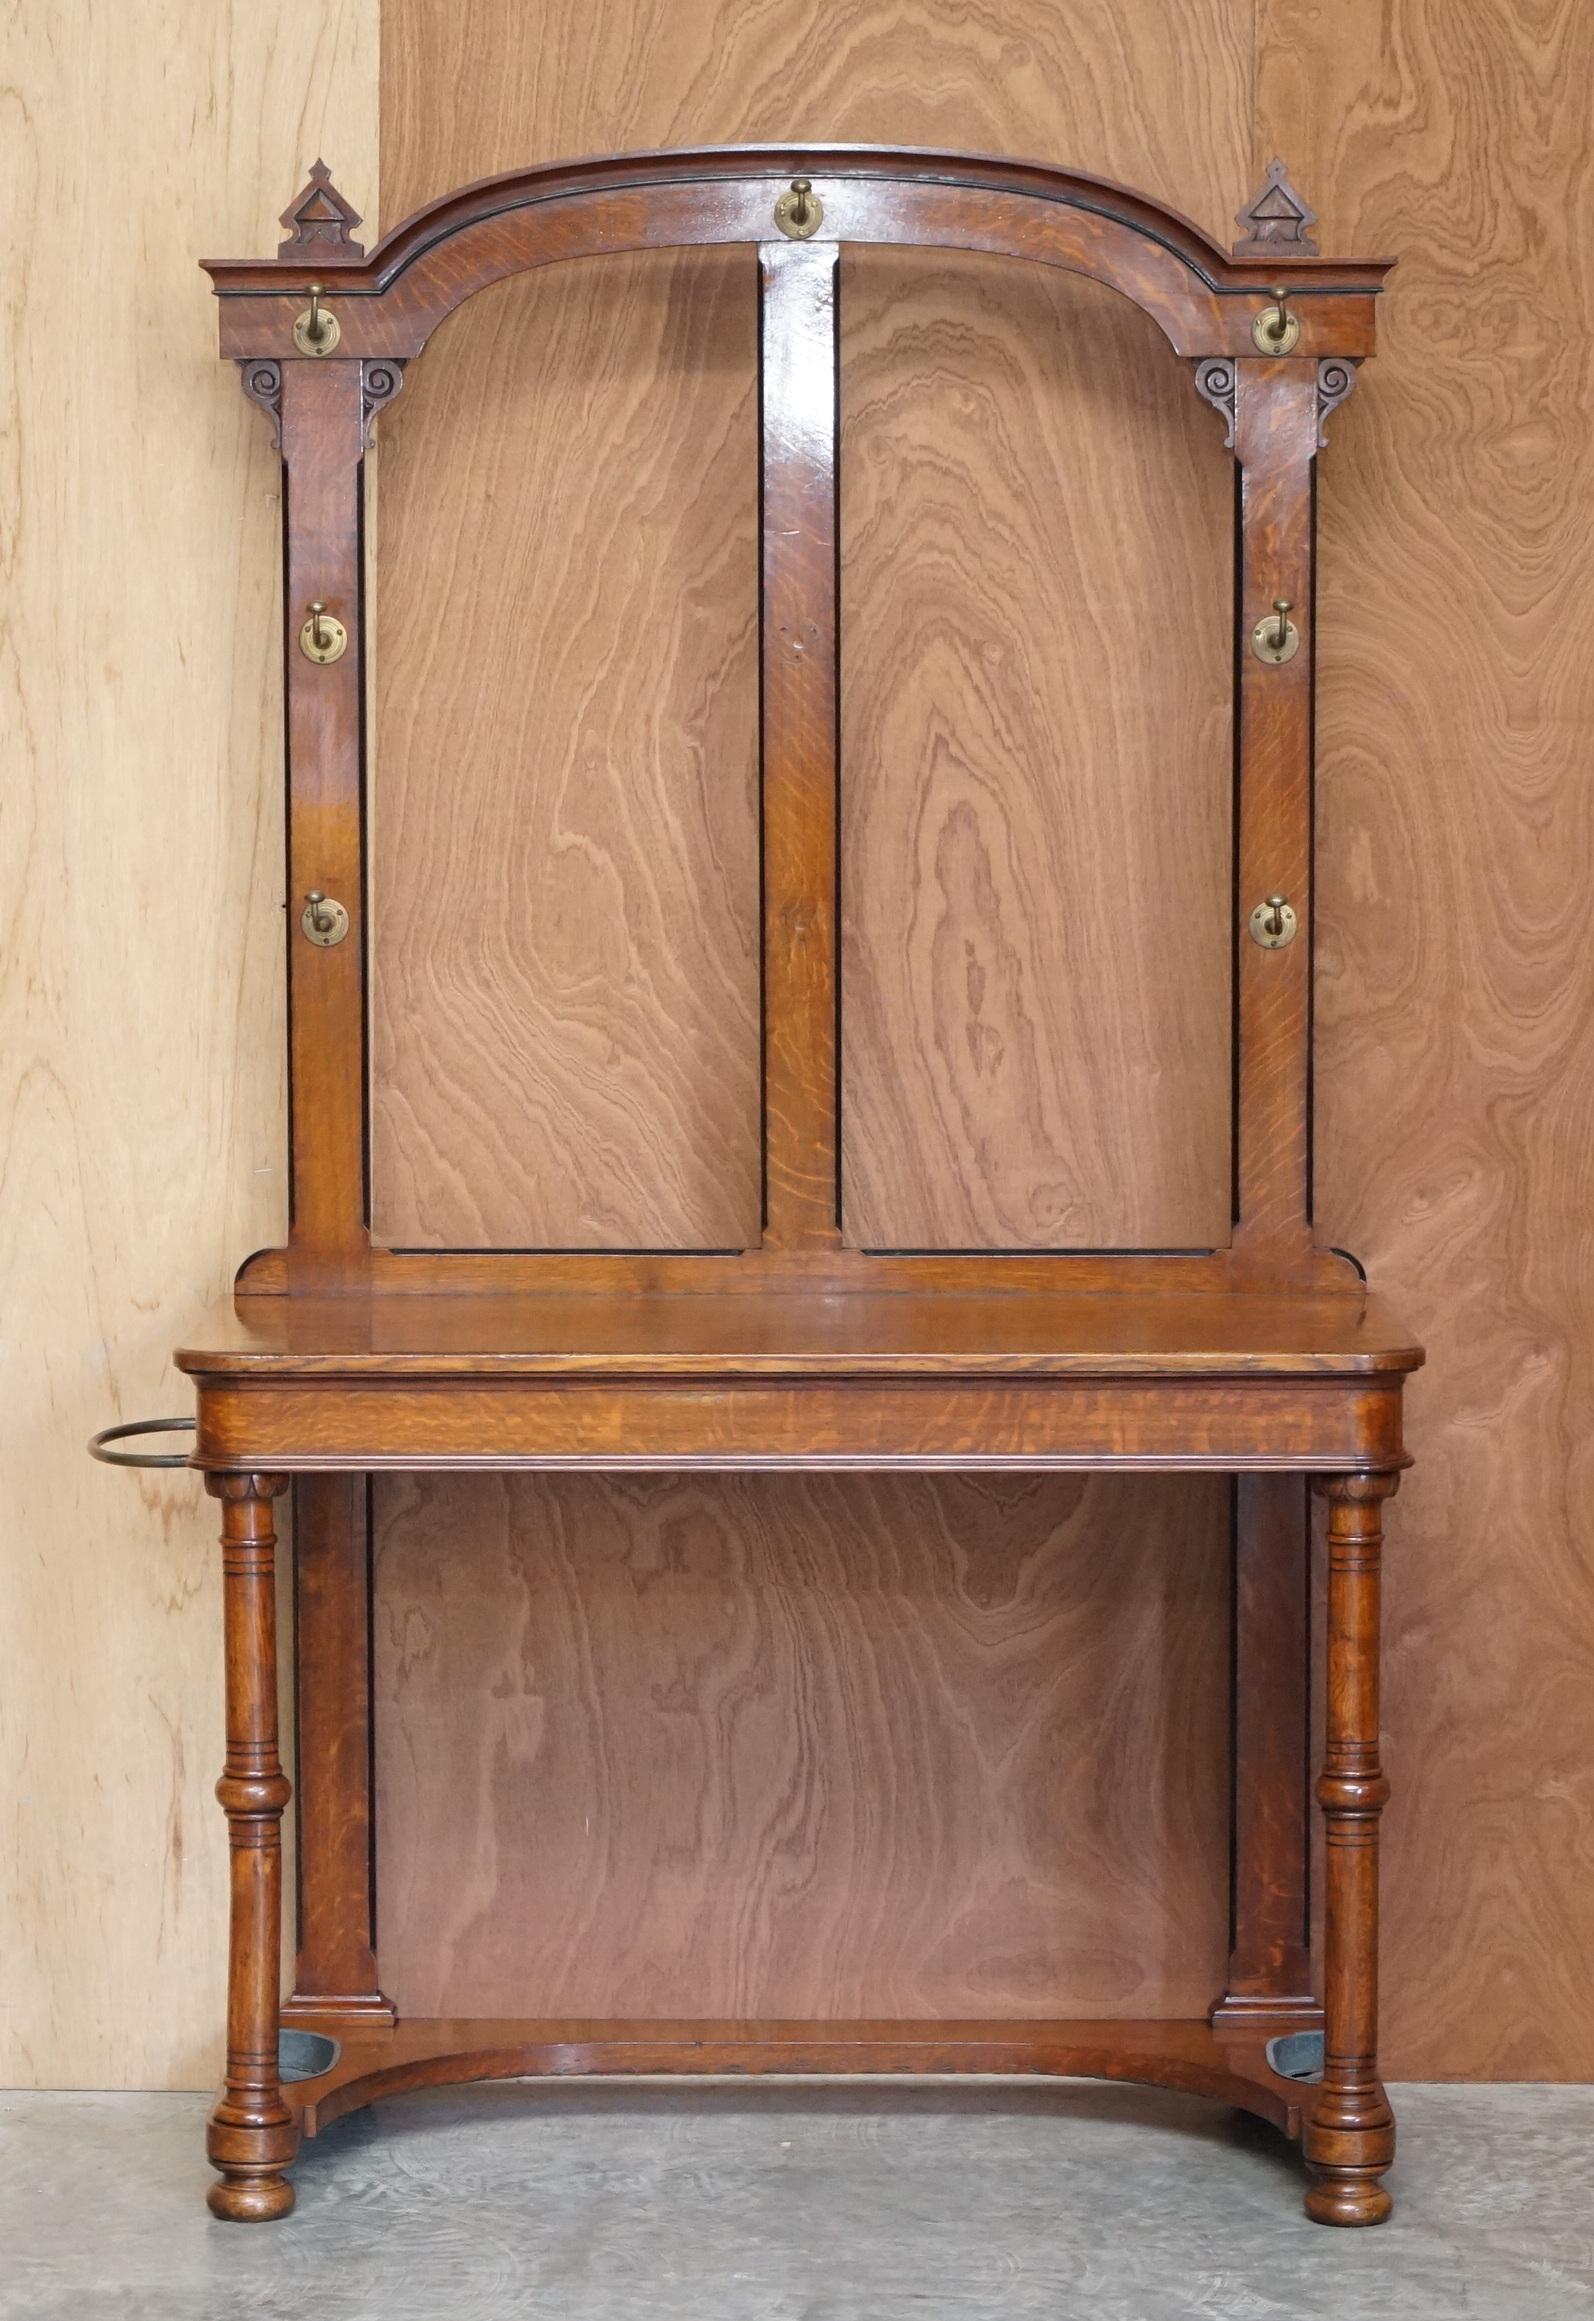 We are delighted to offer this very nice hand made in England circa 1830 William IV oak hall stand with bronze fixtures

A good looking and well made piece, it has a very Pugin look and feel to it, the pillared legs and finial tops look